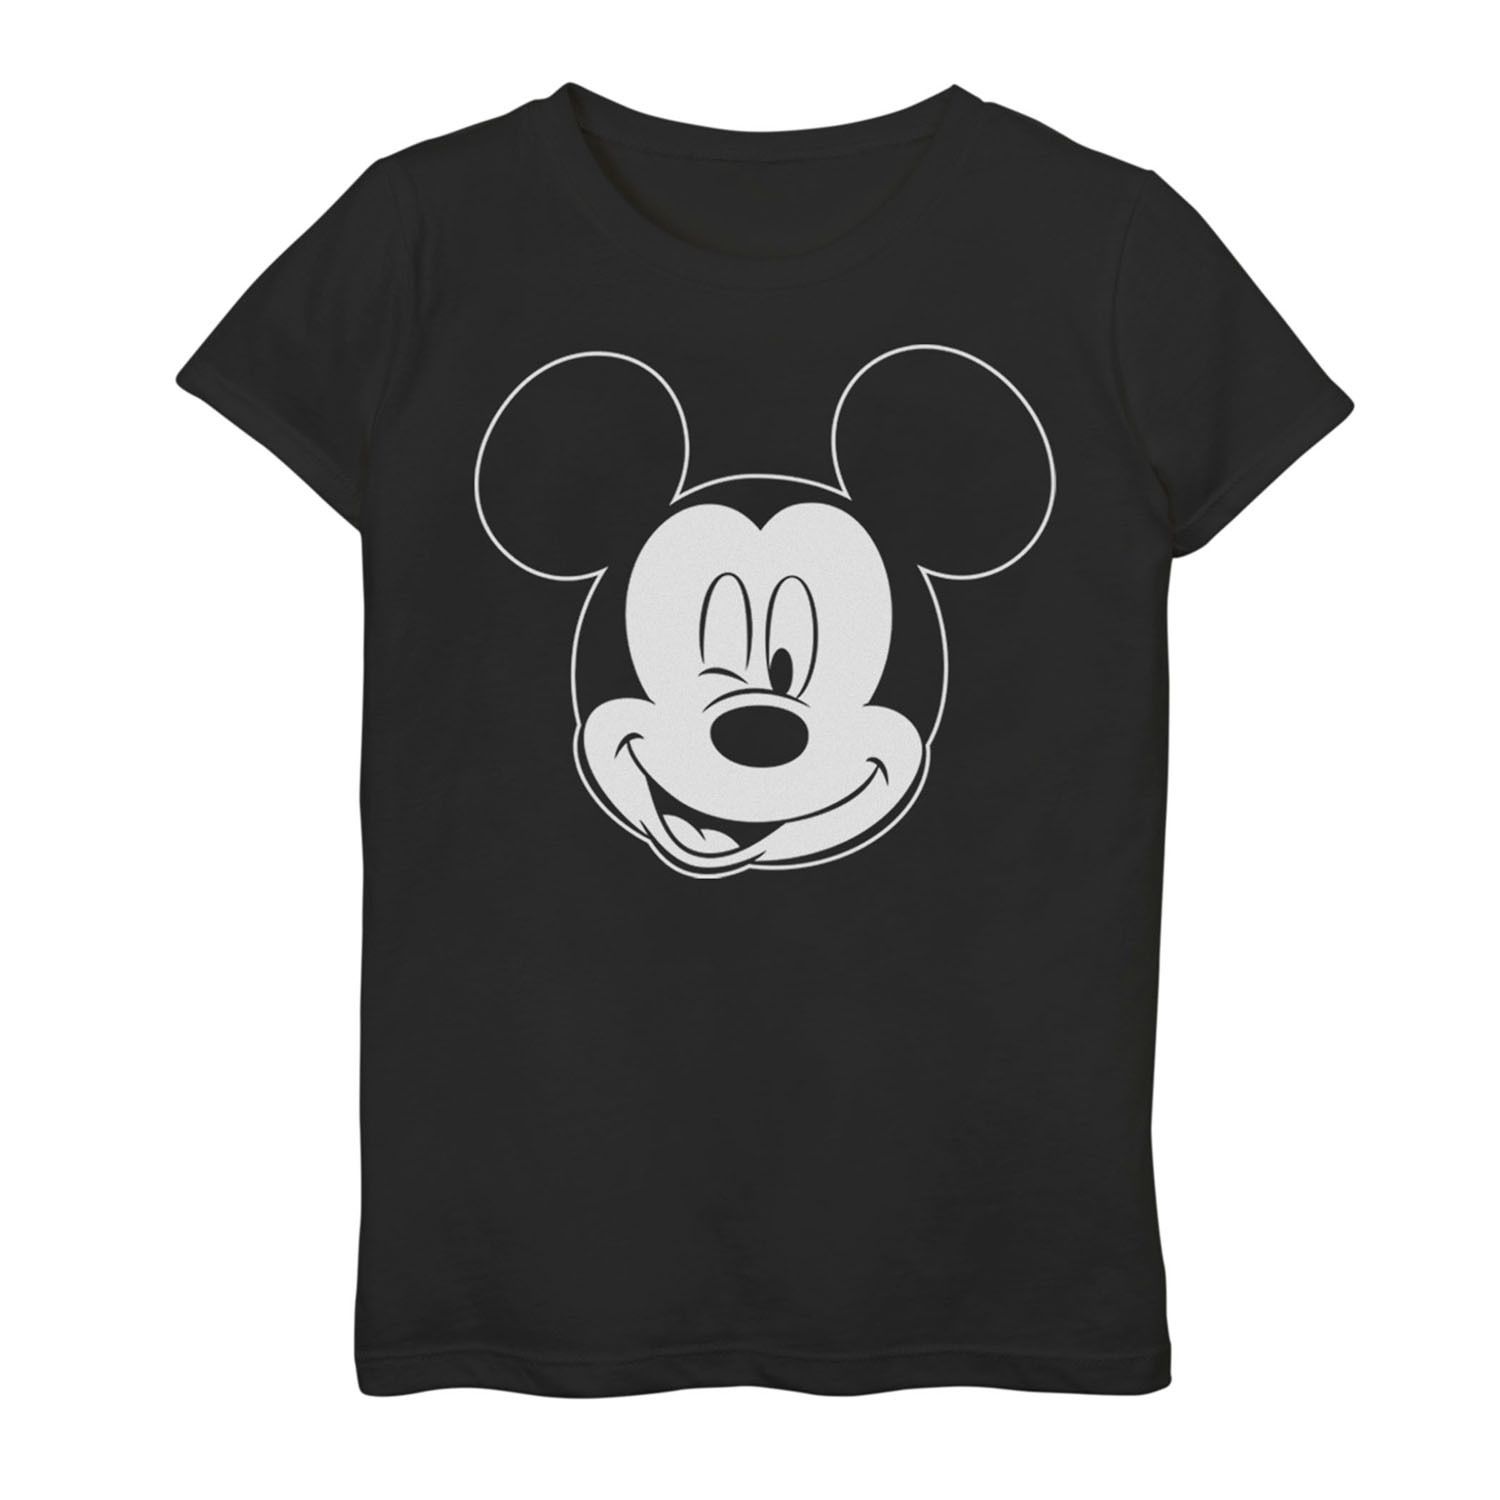 Image for Disney Girls 7-16 Mickey Mouse Large White Outline Winking Face Graphic Tee at Kohl's.